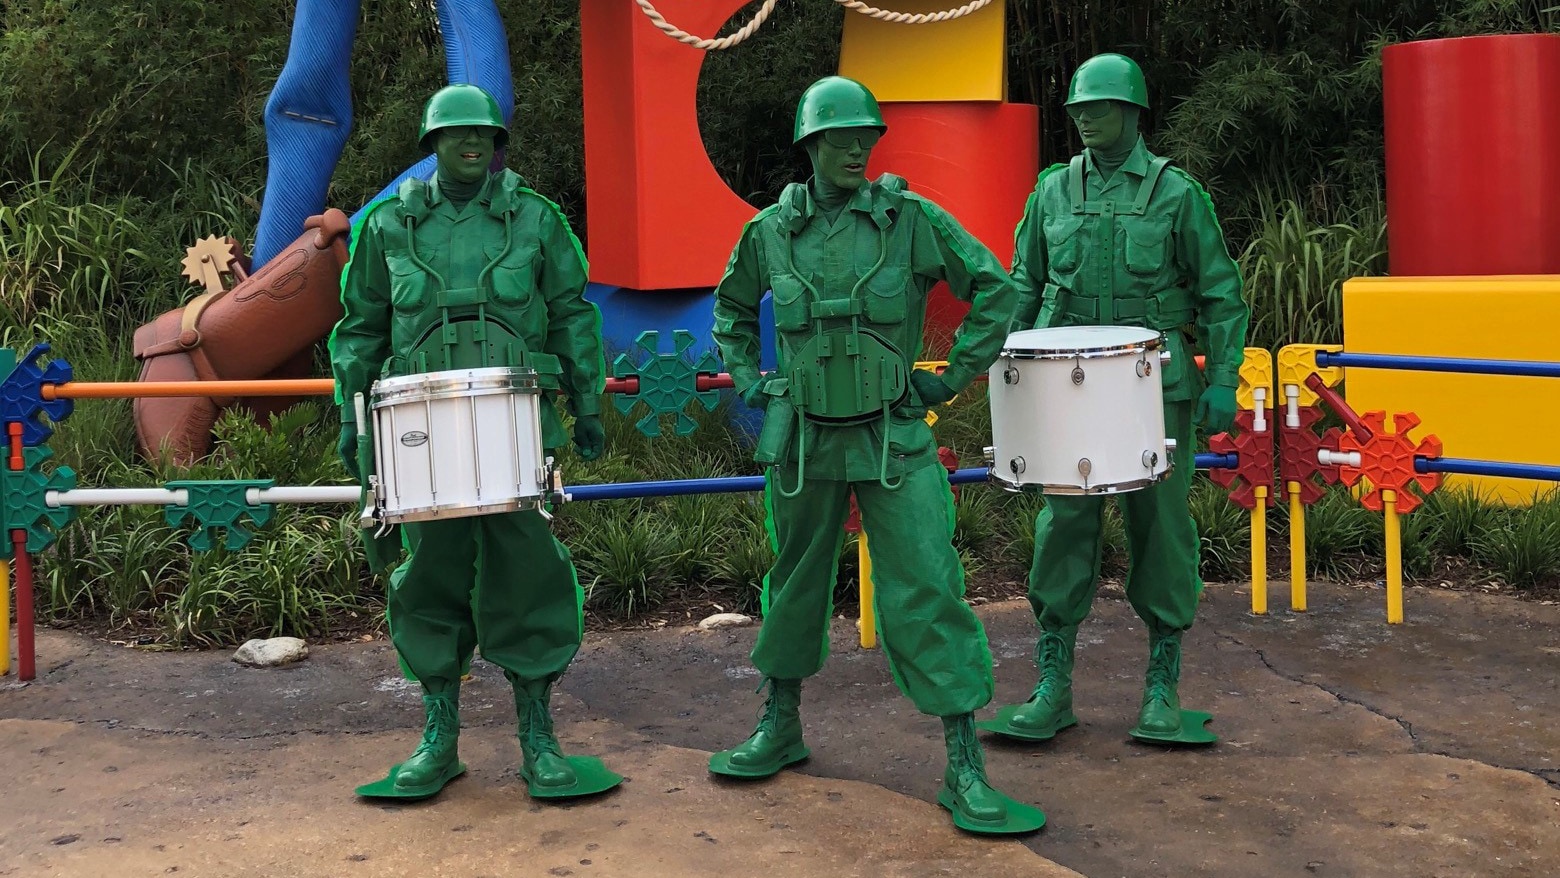 The Green Army Man Drum Corps stand, ready to play, in front of Woody and the Toy Story Land sign